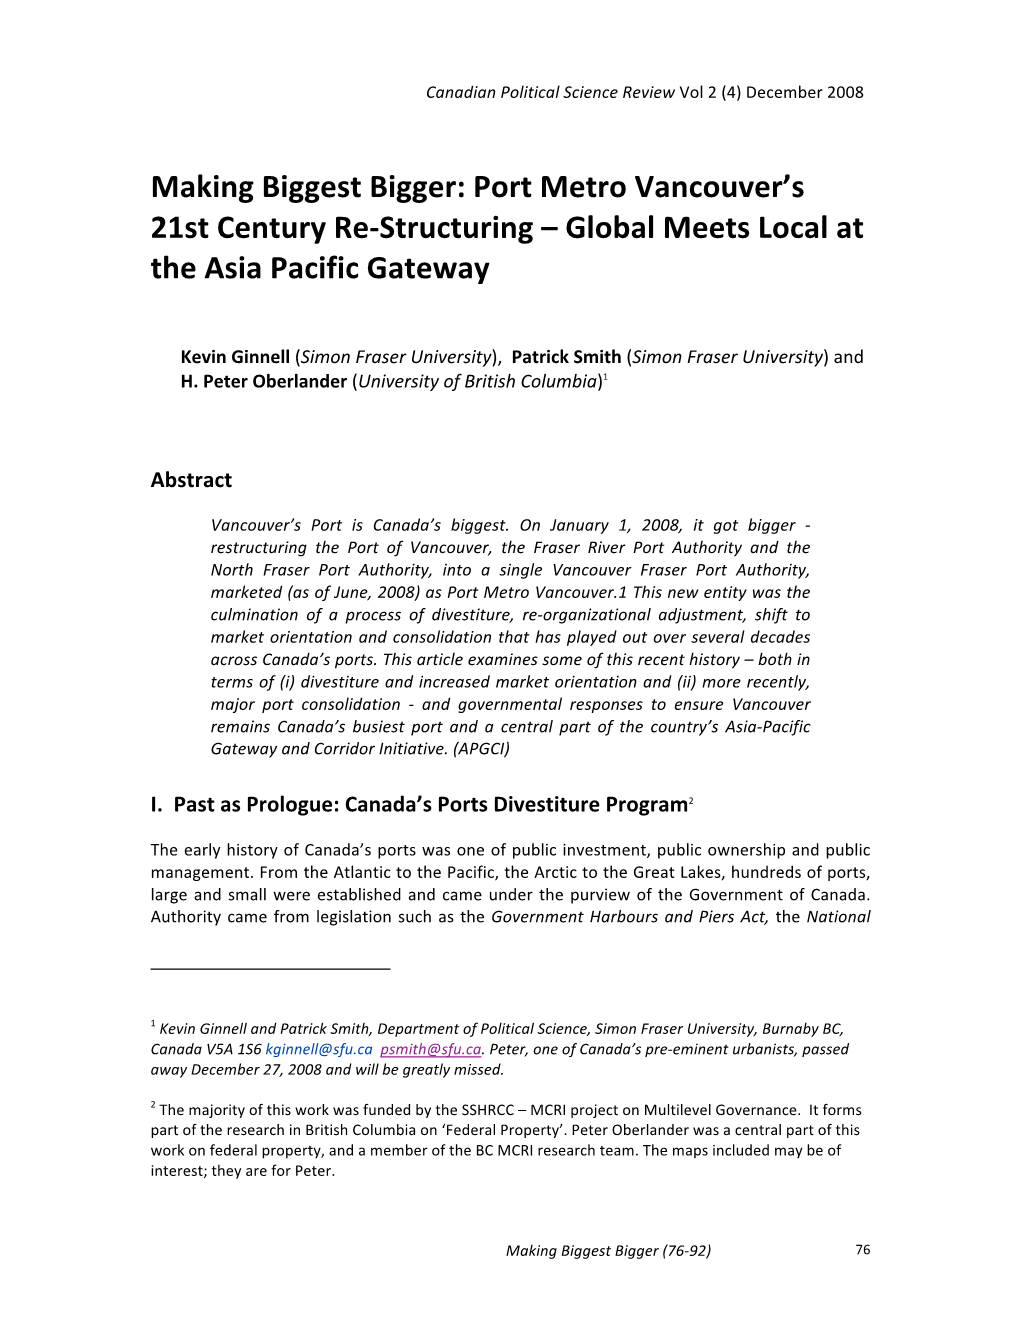 Port Metro Vancouver's 21St Century Re‐Structuring